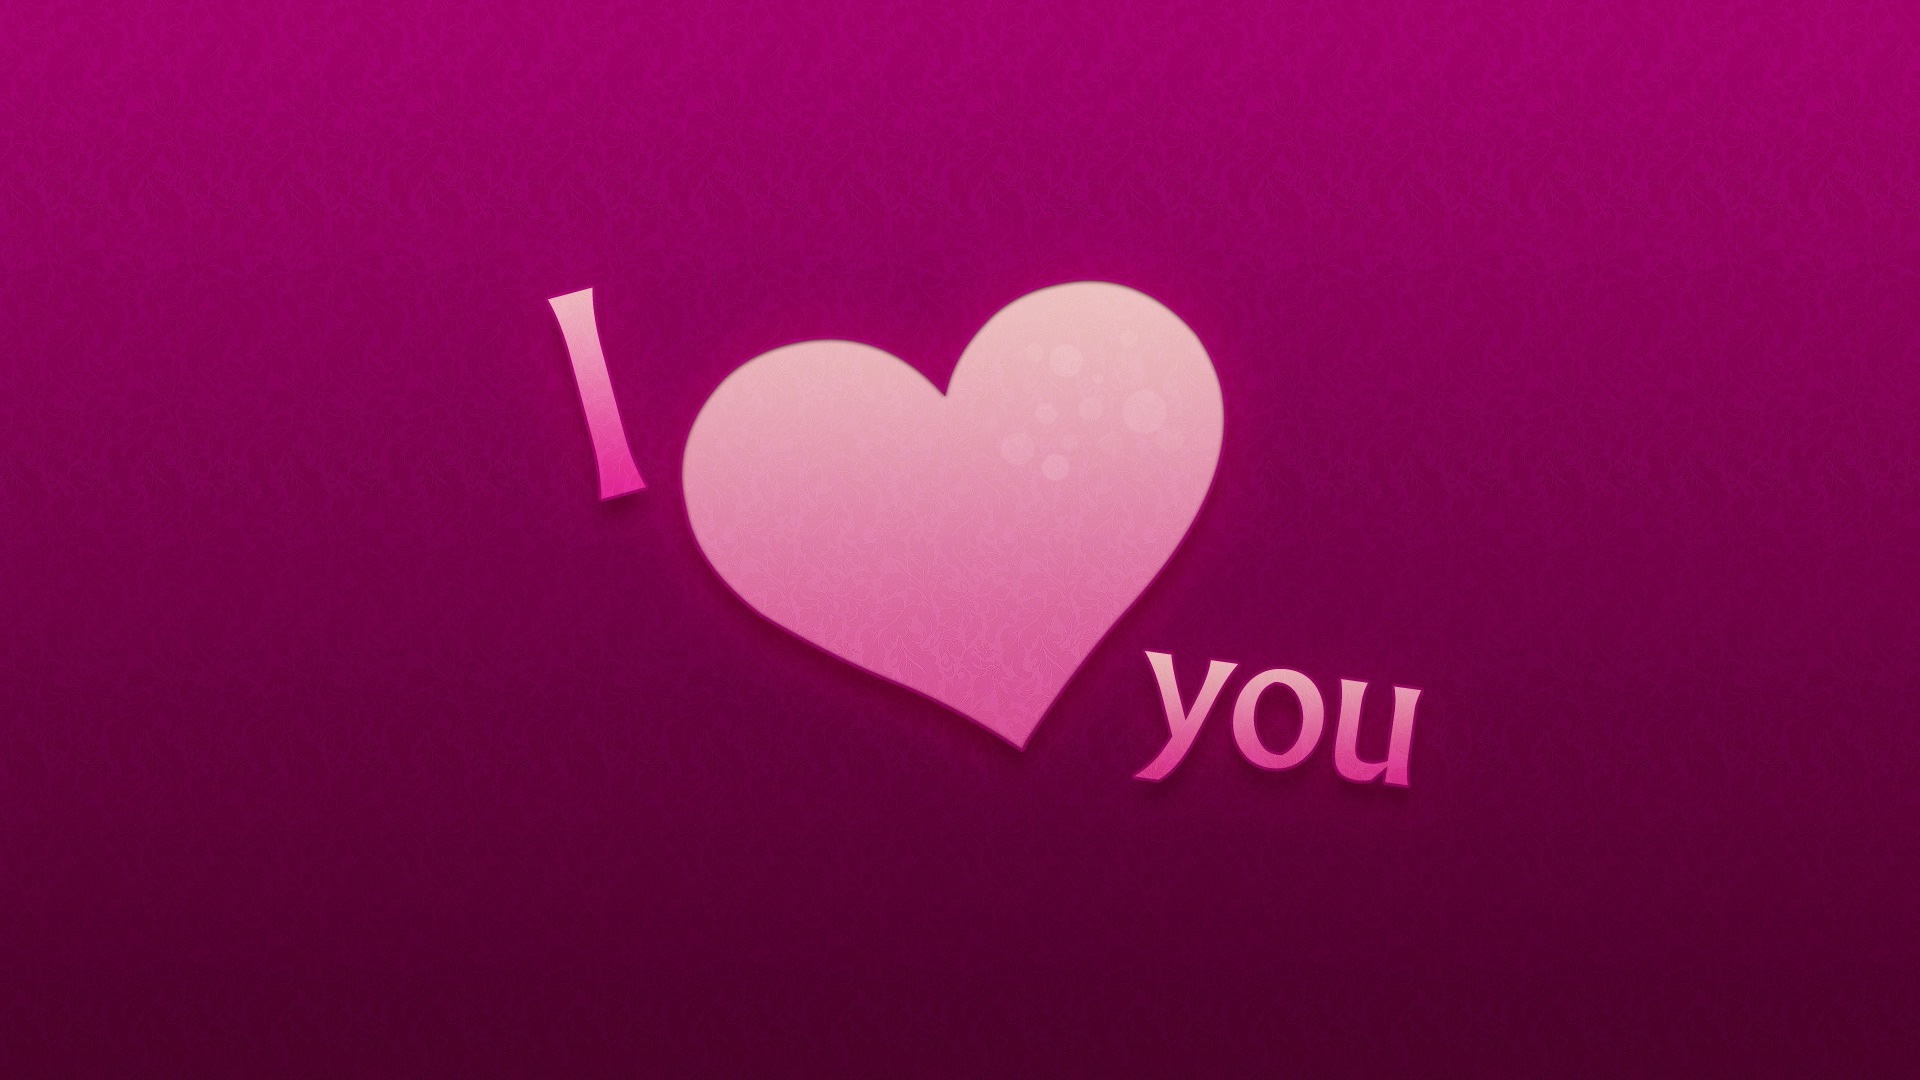 I Love You Say To Girl Friends HD Wallpaper Rocks